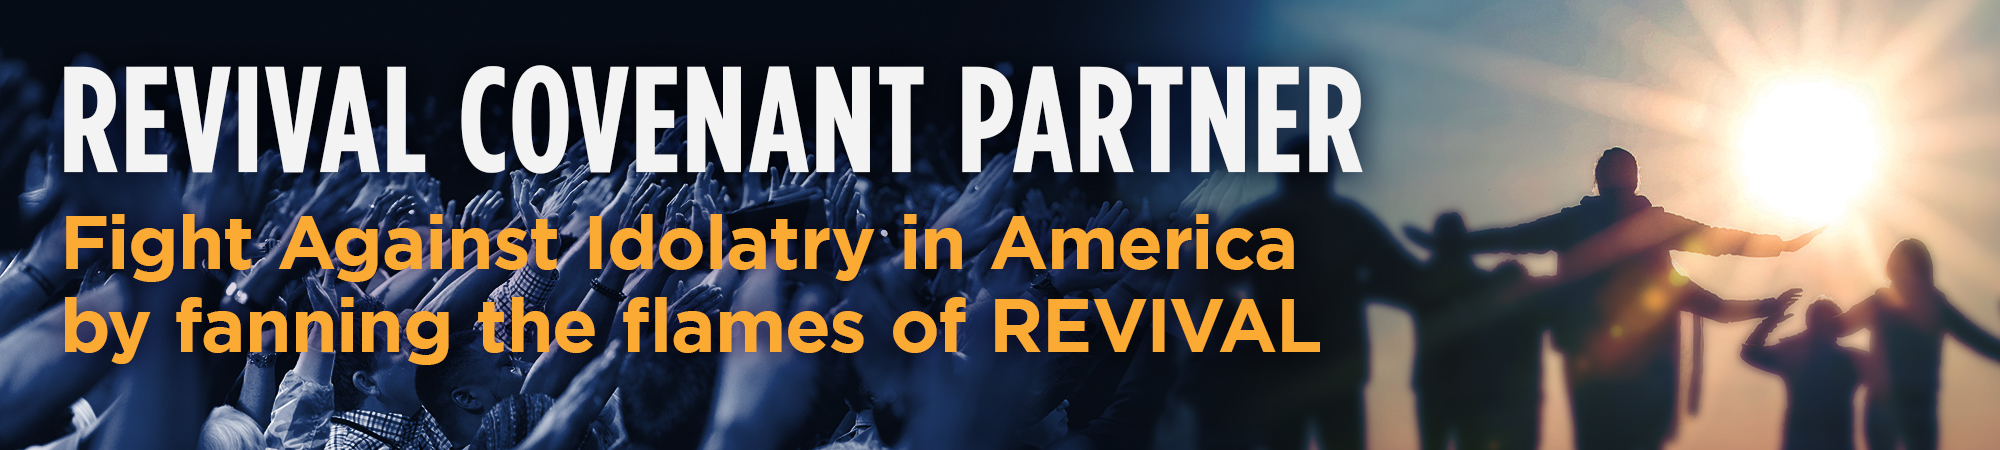 Spark Revival and Restore Our Nation